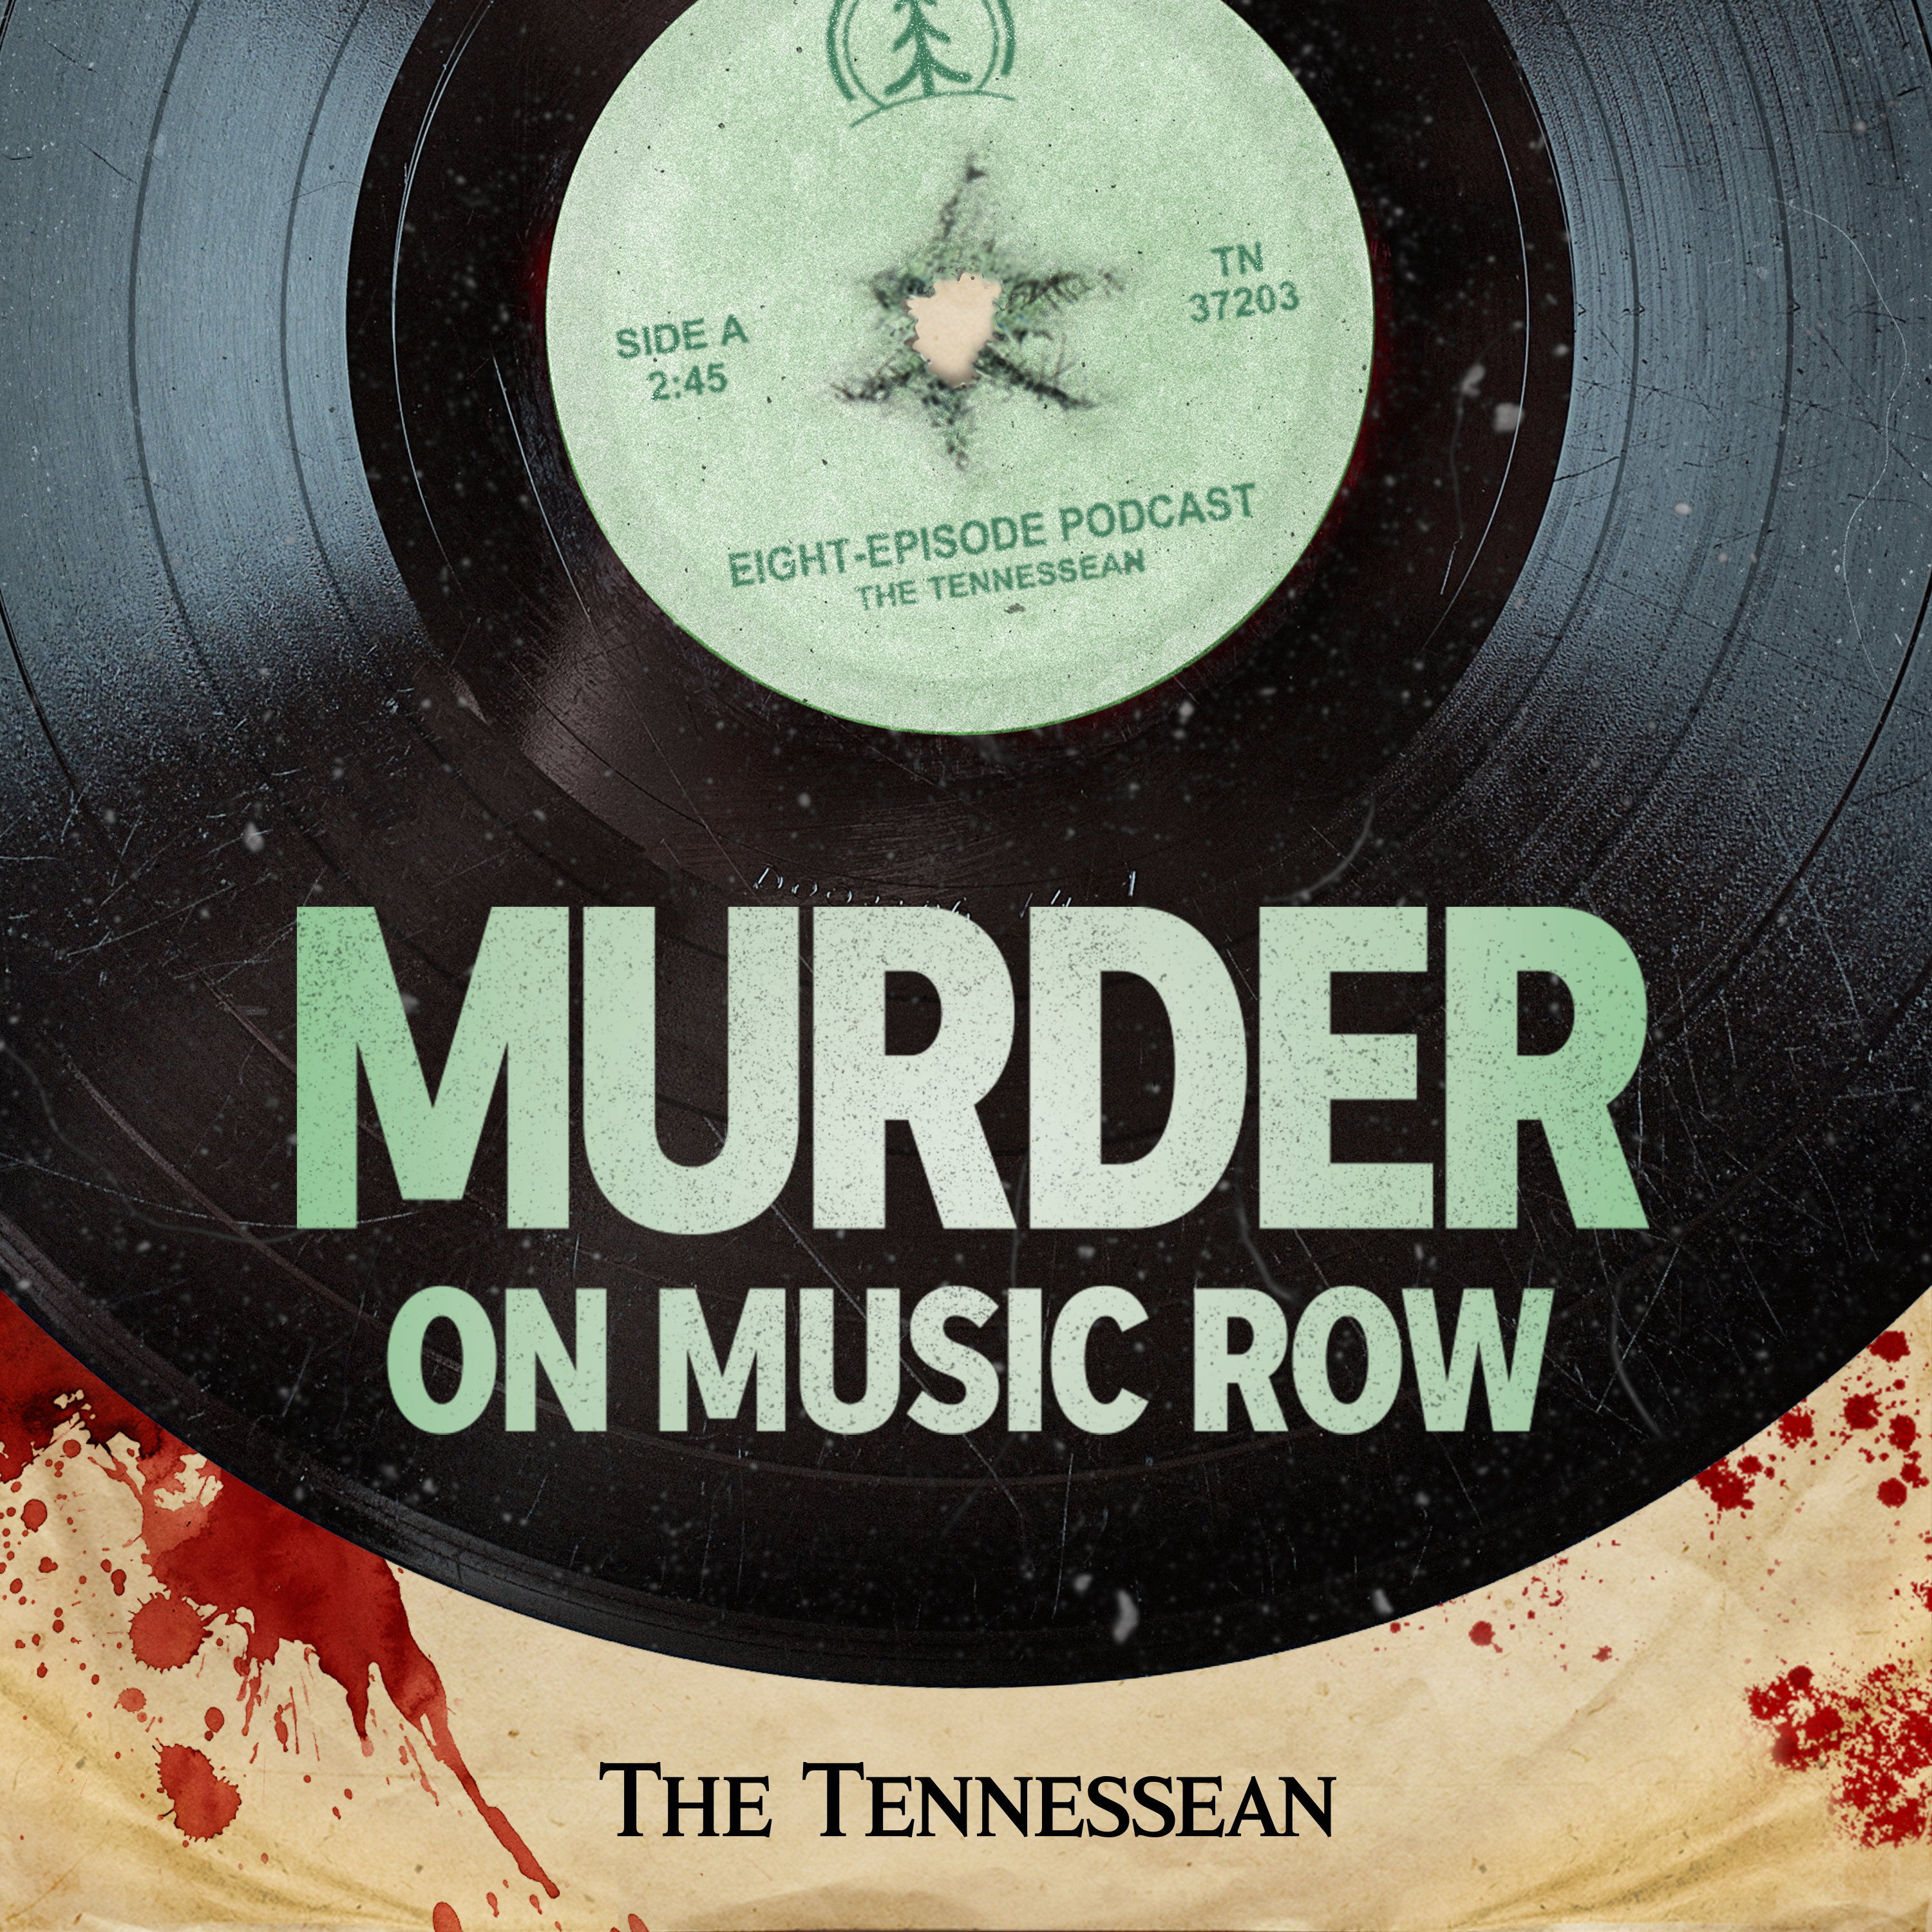 Introducing — Murder on Music Row: A true crime podcast from The Tennessean